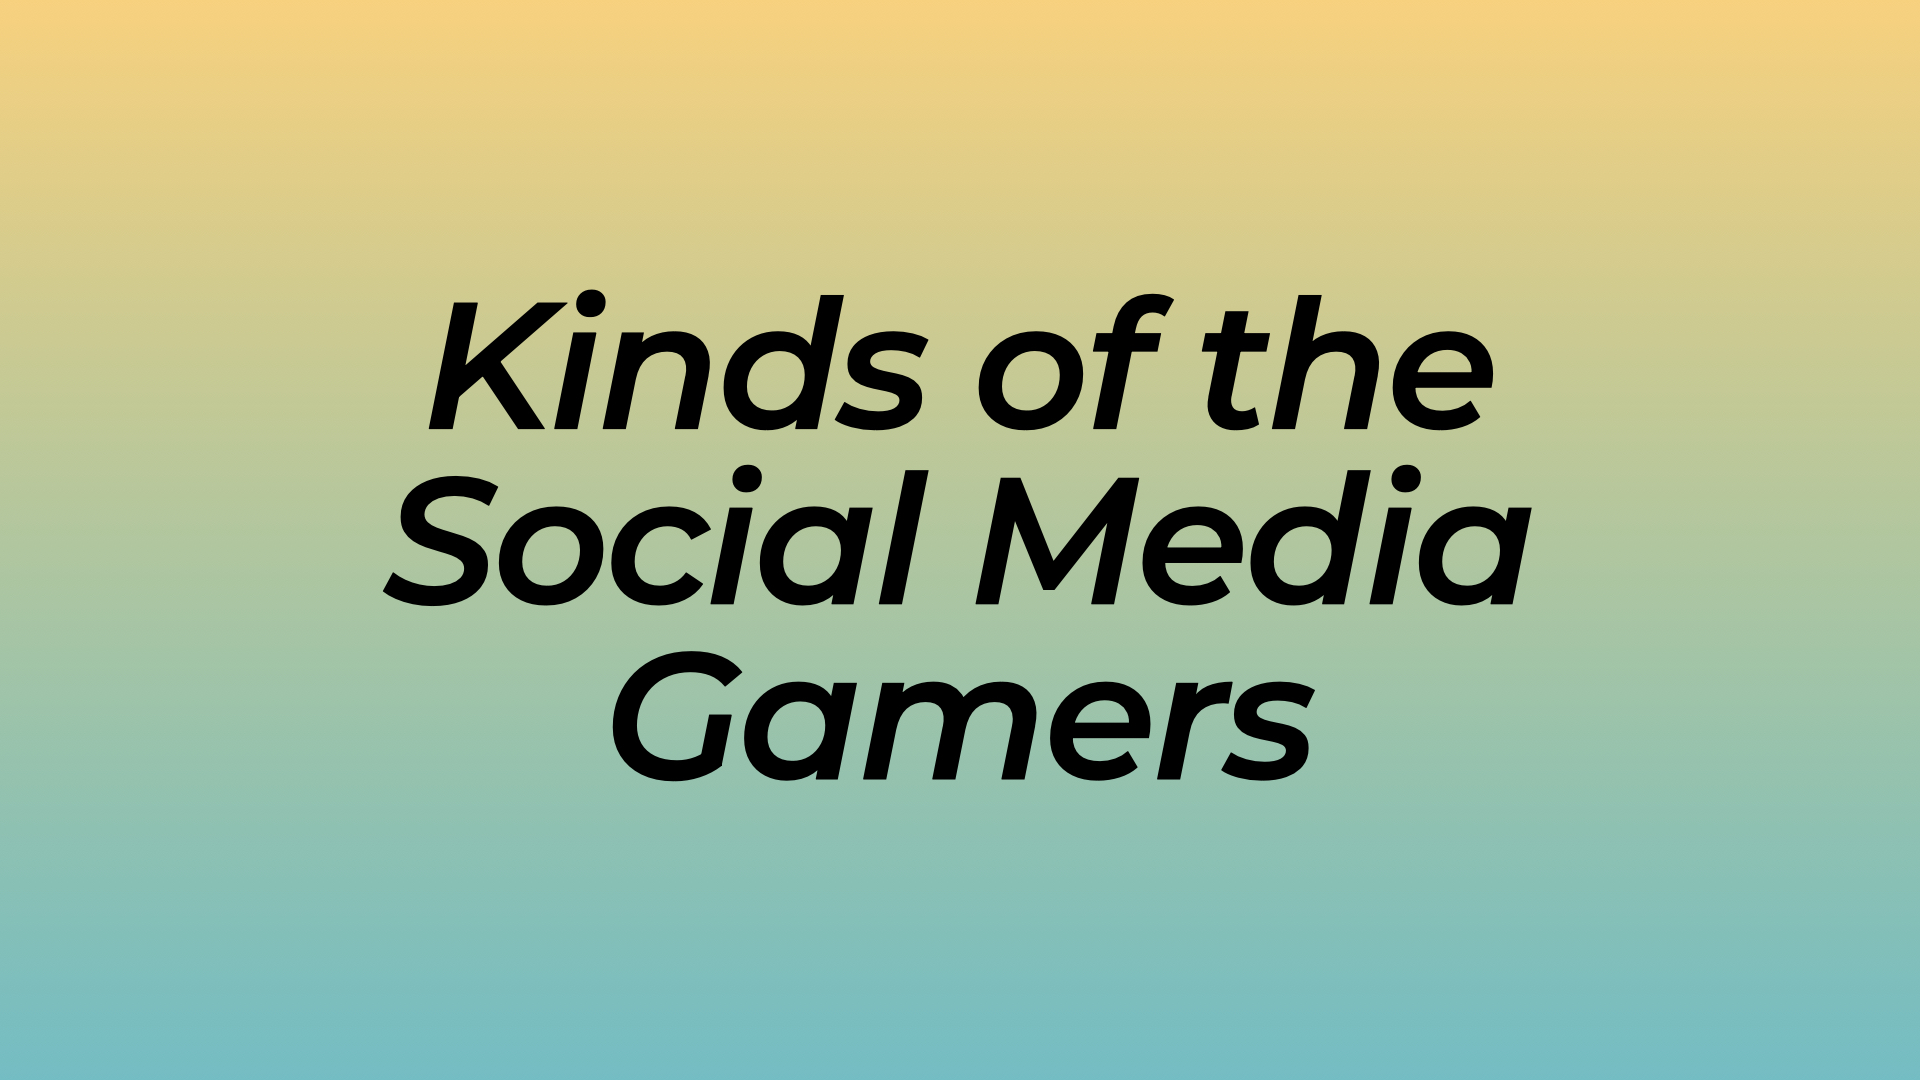 Kinds of the Social Media Gamers